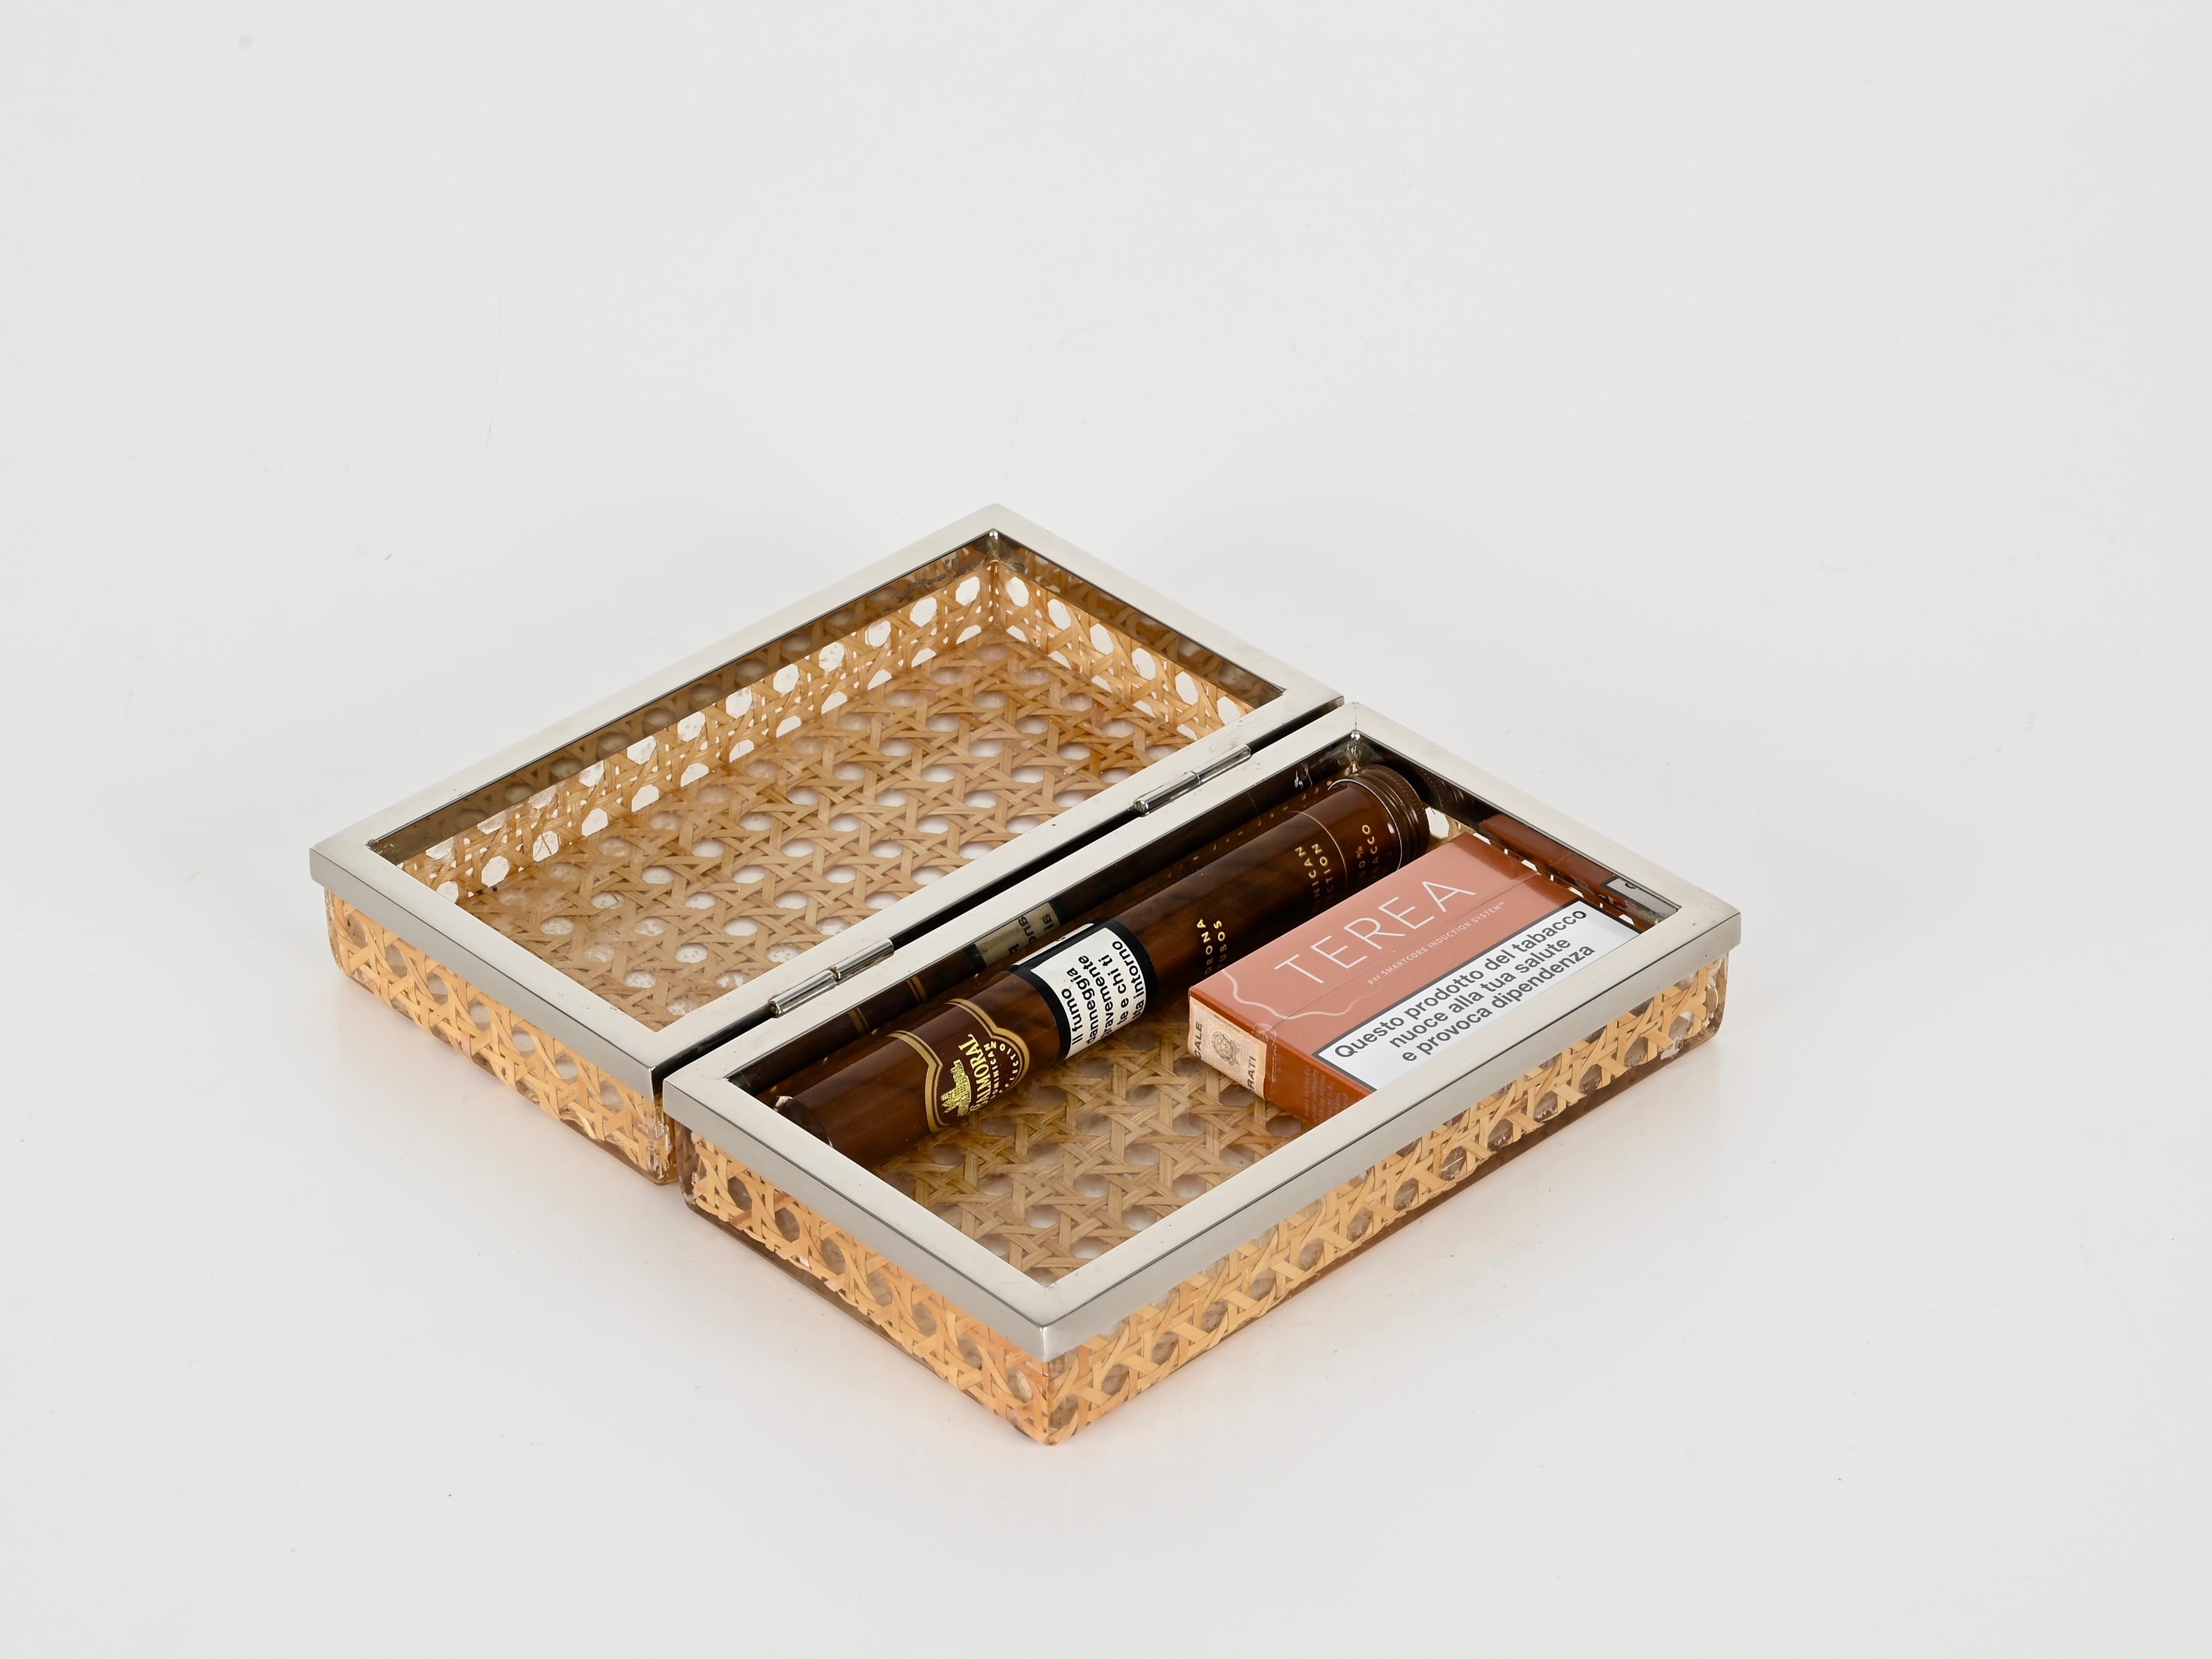 Wicker Midcentury Chrome, Lucite and Vienna Straw Italian Box 1970s Christian Dior For Sale